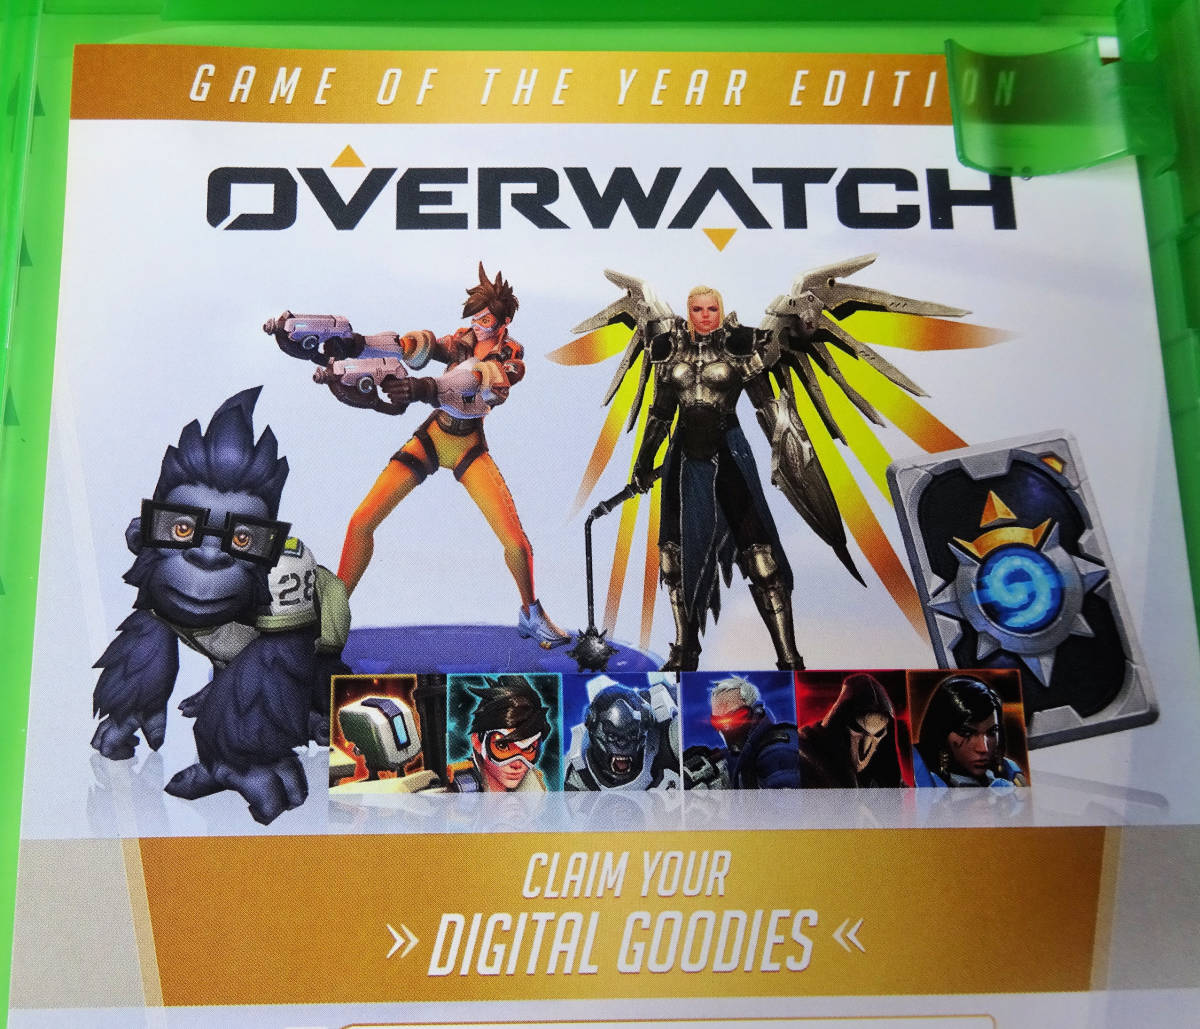  over watch game ob The year * edition DLC unused OVERWATCH Game of the Year Edition EU version * XBOX ONE / XBOX SERIES X